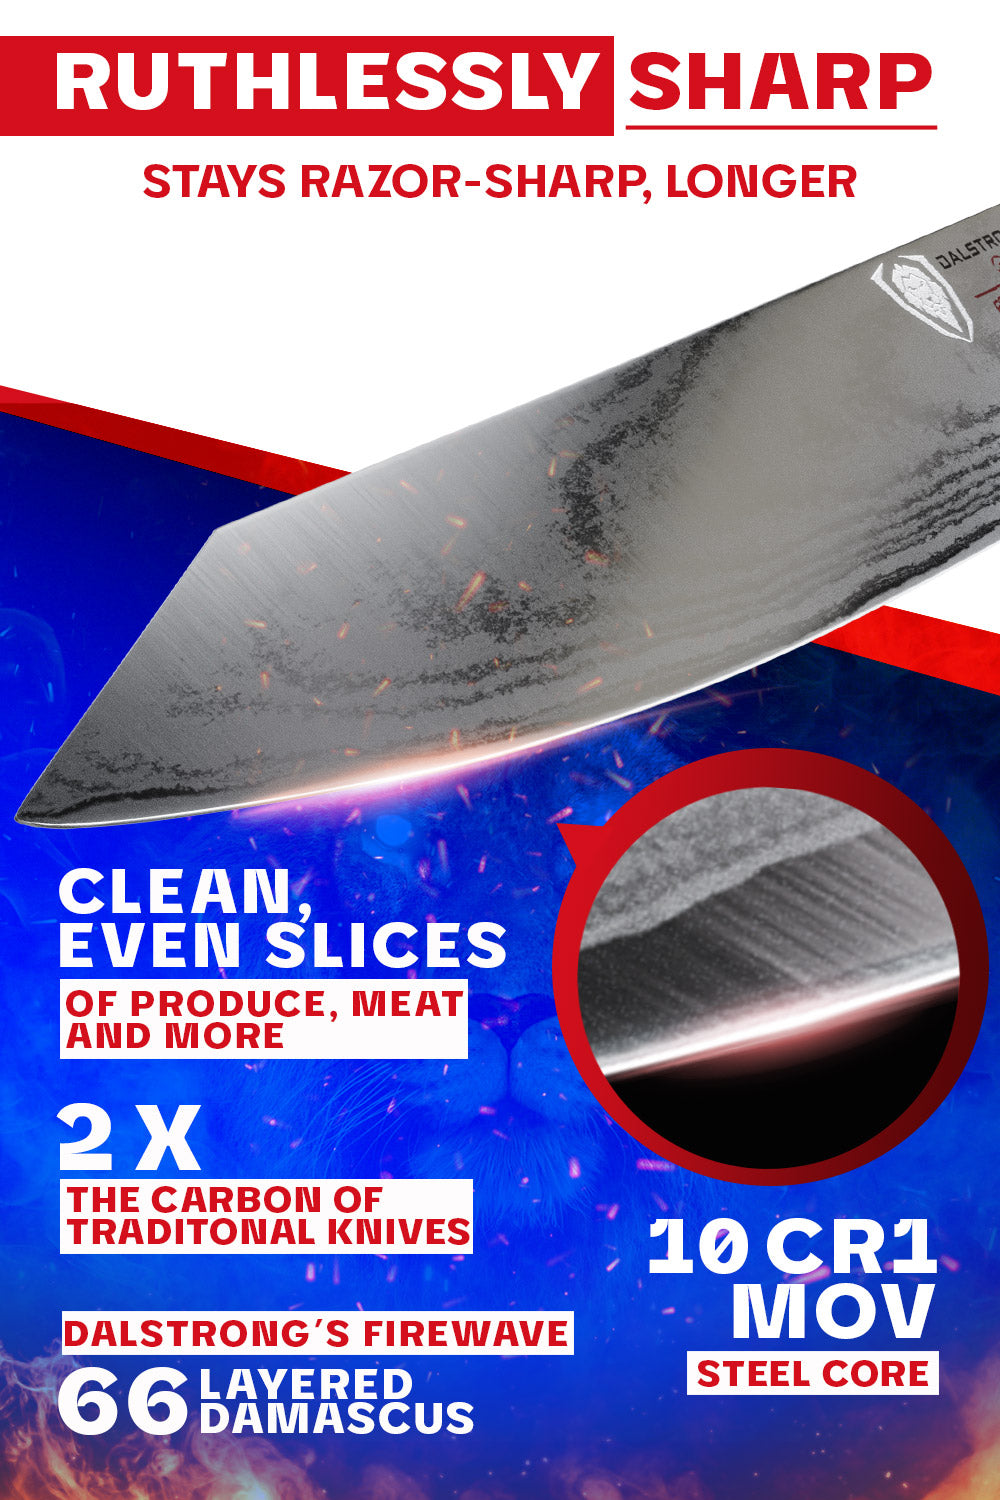 Quantum 1 Series 9.5 Chef Knife | Dalstrong Knives